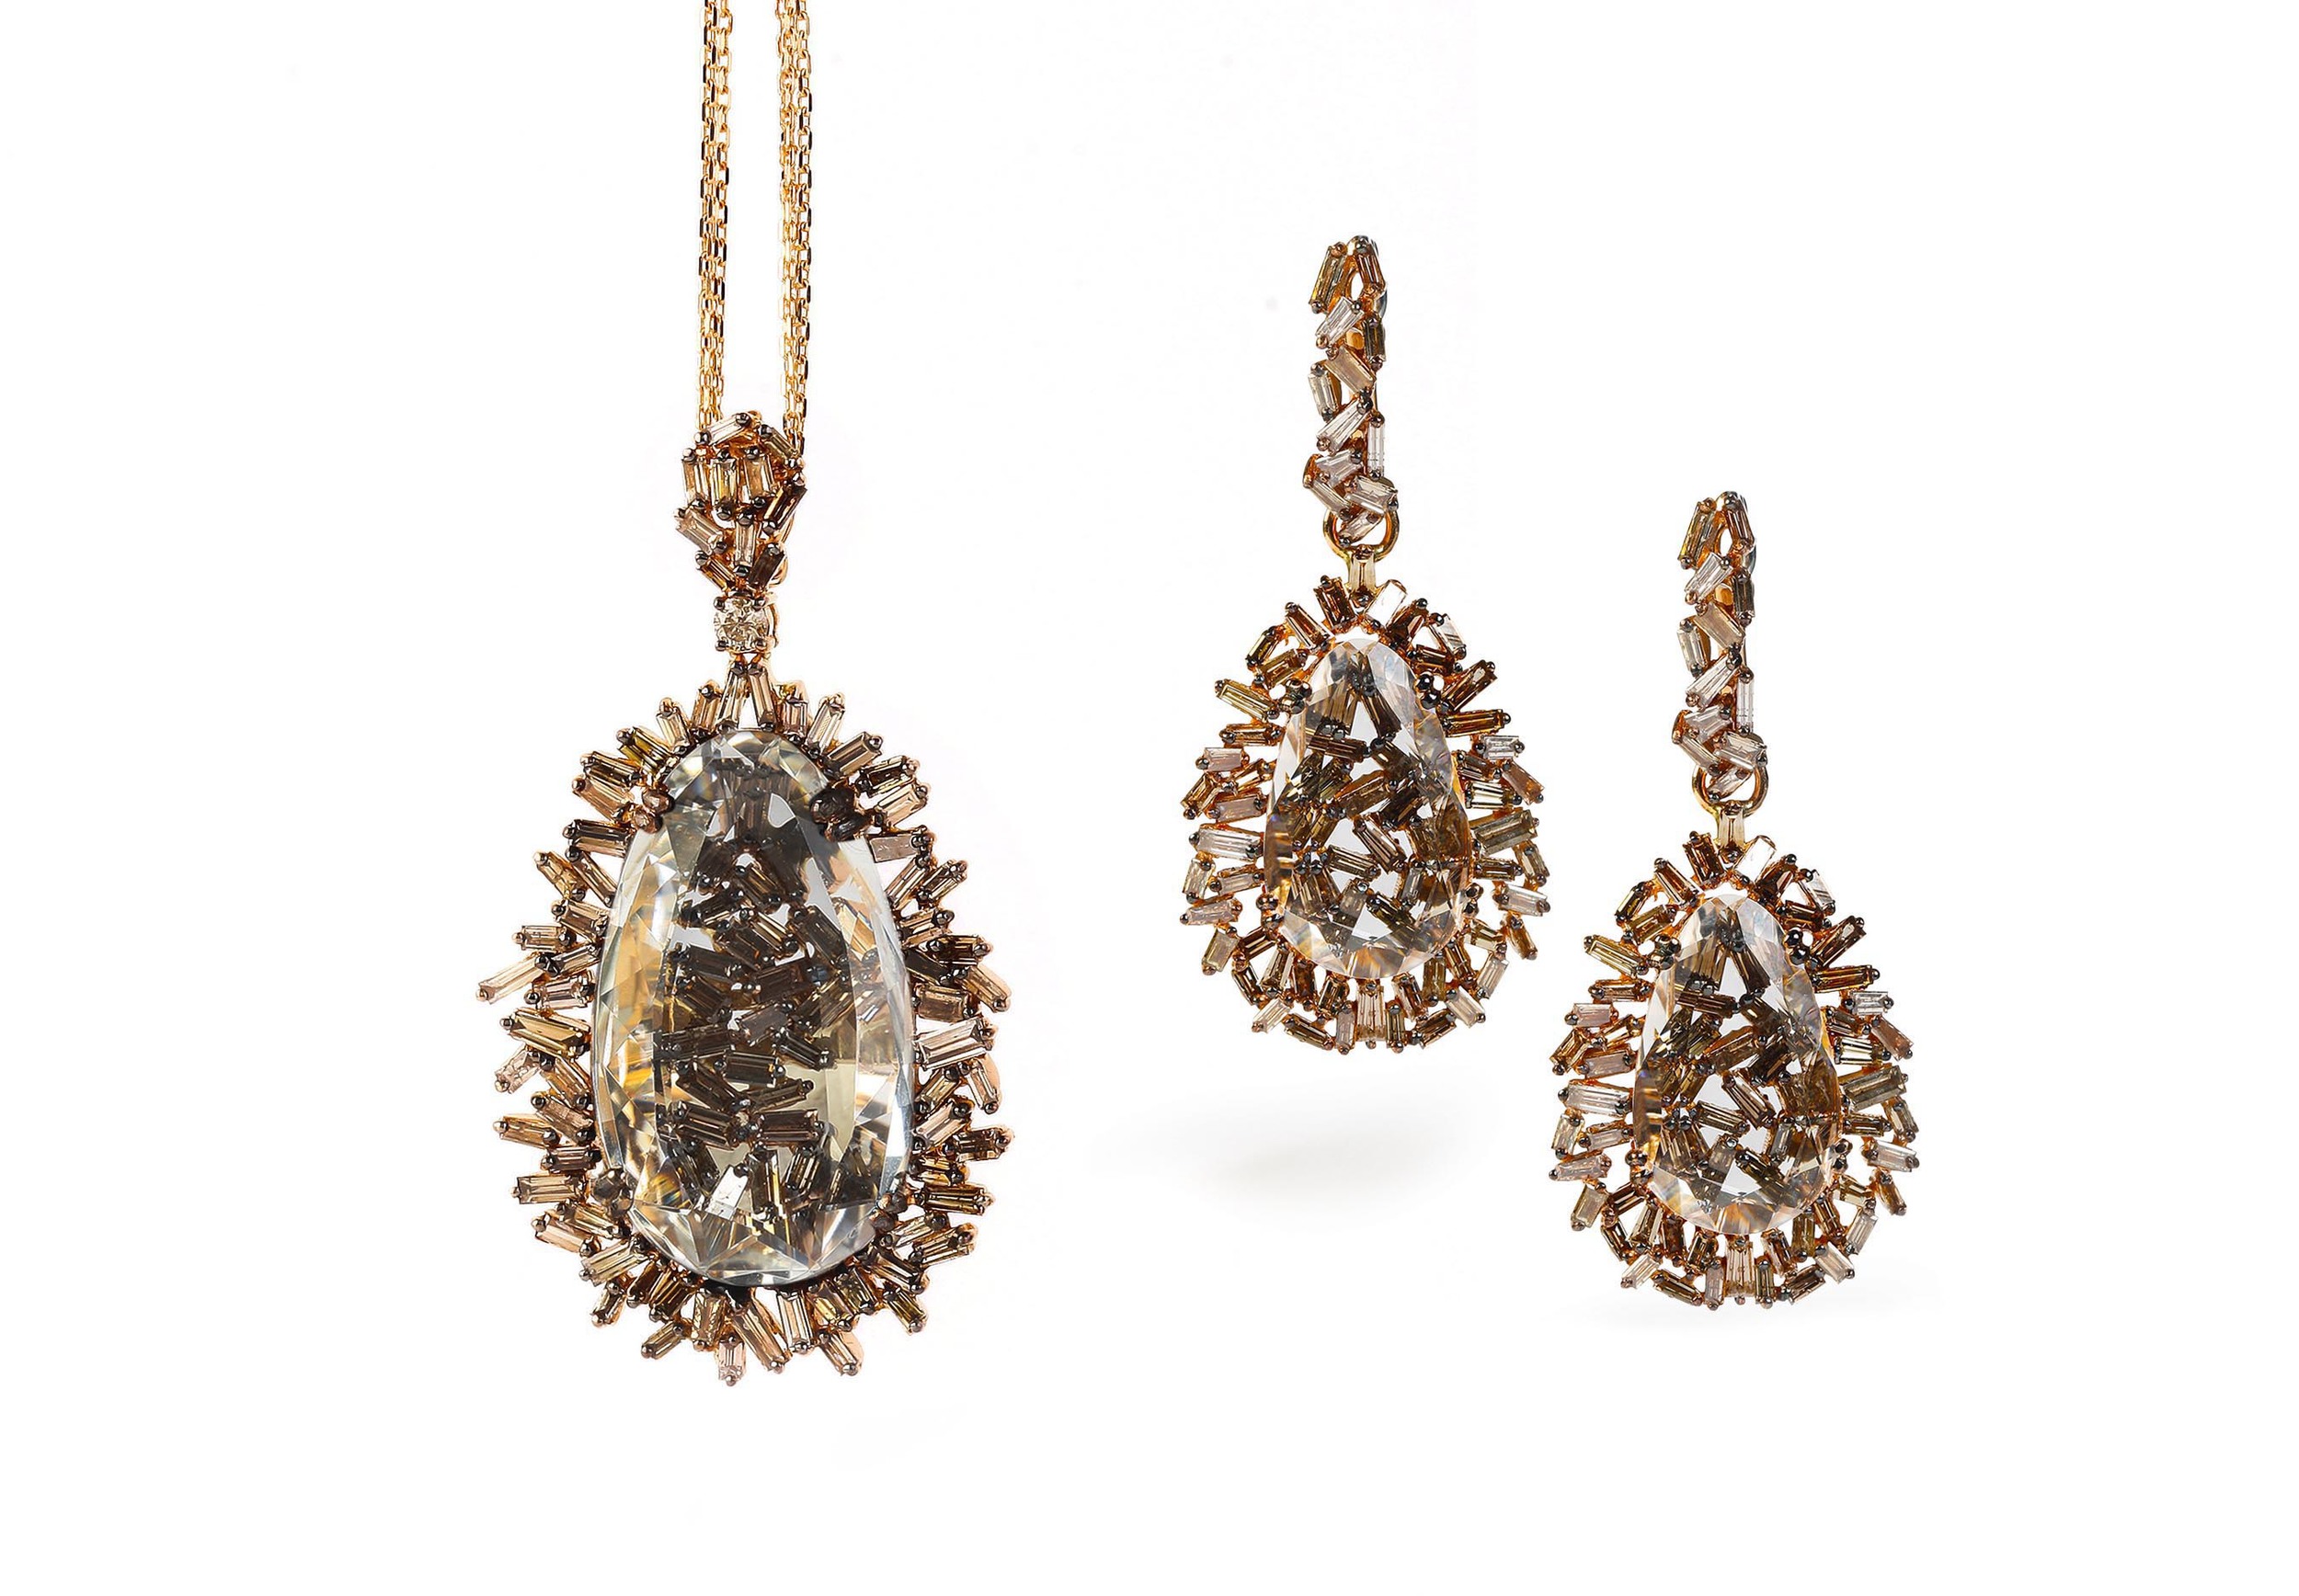  18k gold earrings and matching necklace from the Vitrine Fireworks collection.&nbsp; 